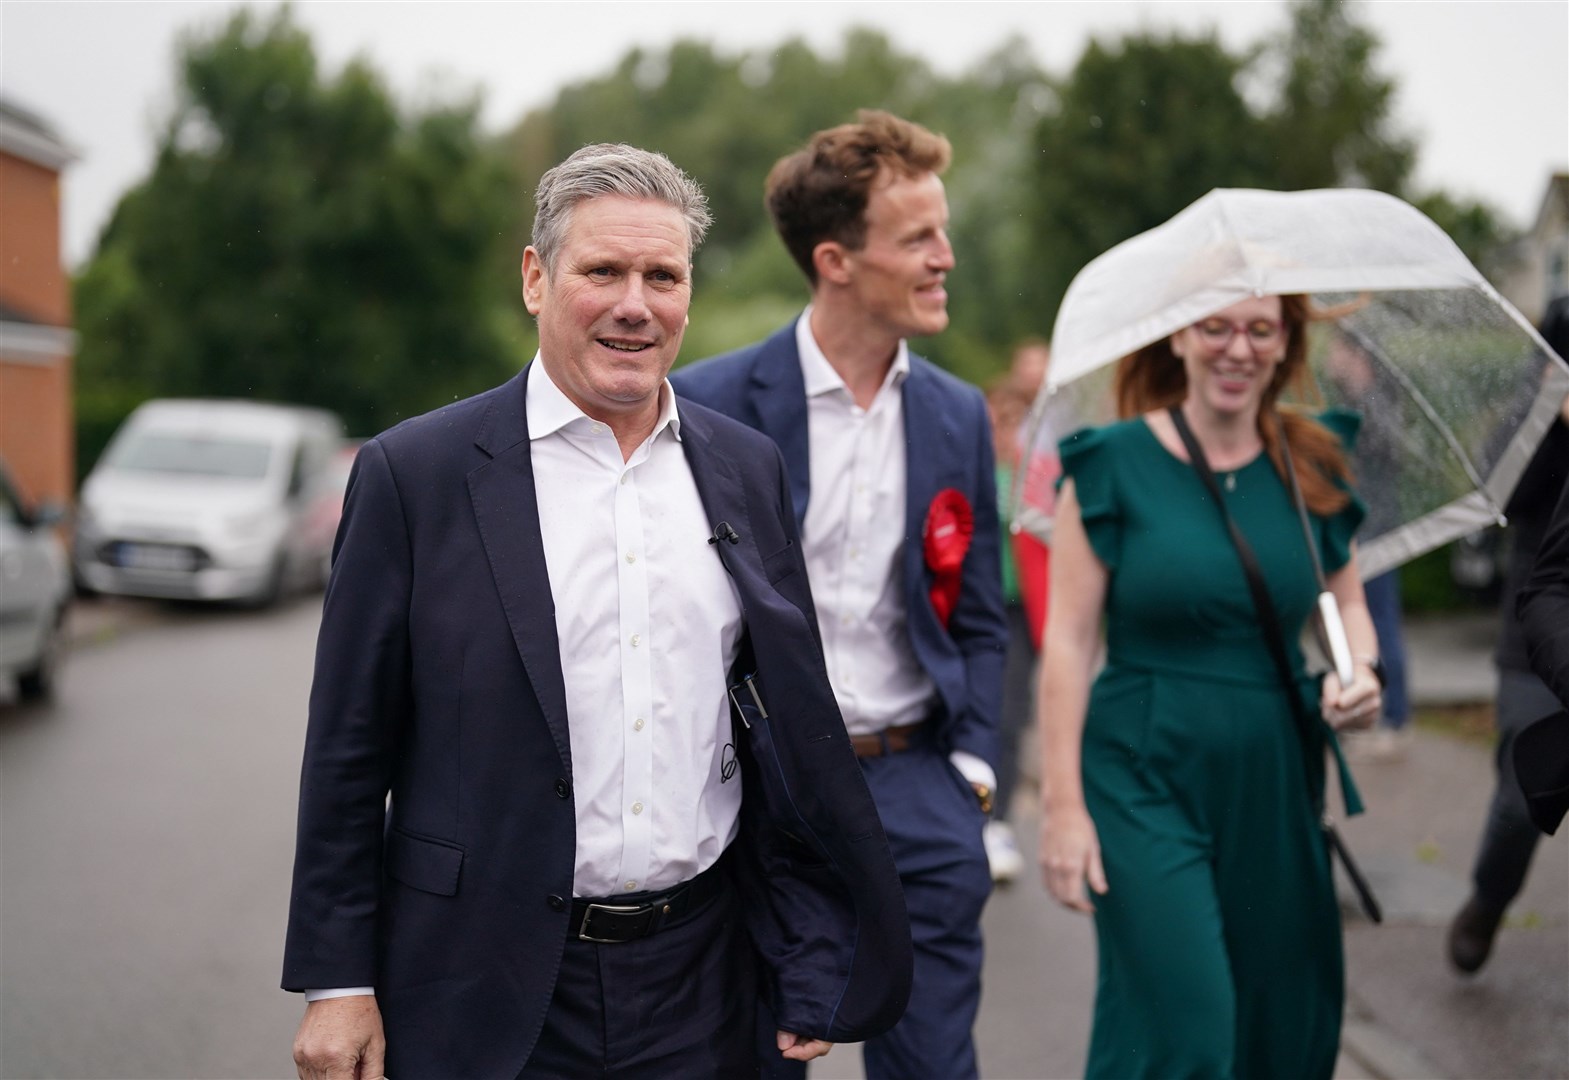 Labour leader Sir Keir Starmer and deputy Labour Party leader Angela Rayner with Labour candidate Alistair Strathern during a visit to Shefford in the constituency of Mid Bedfordshire (Jacob King/PA)